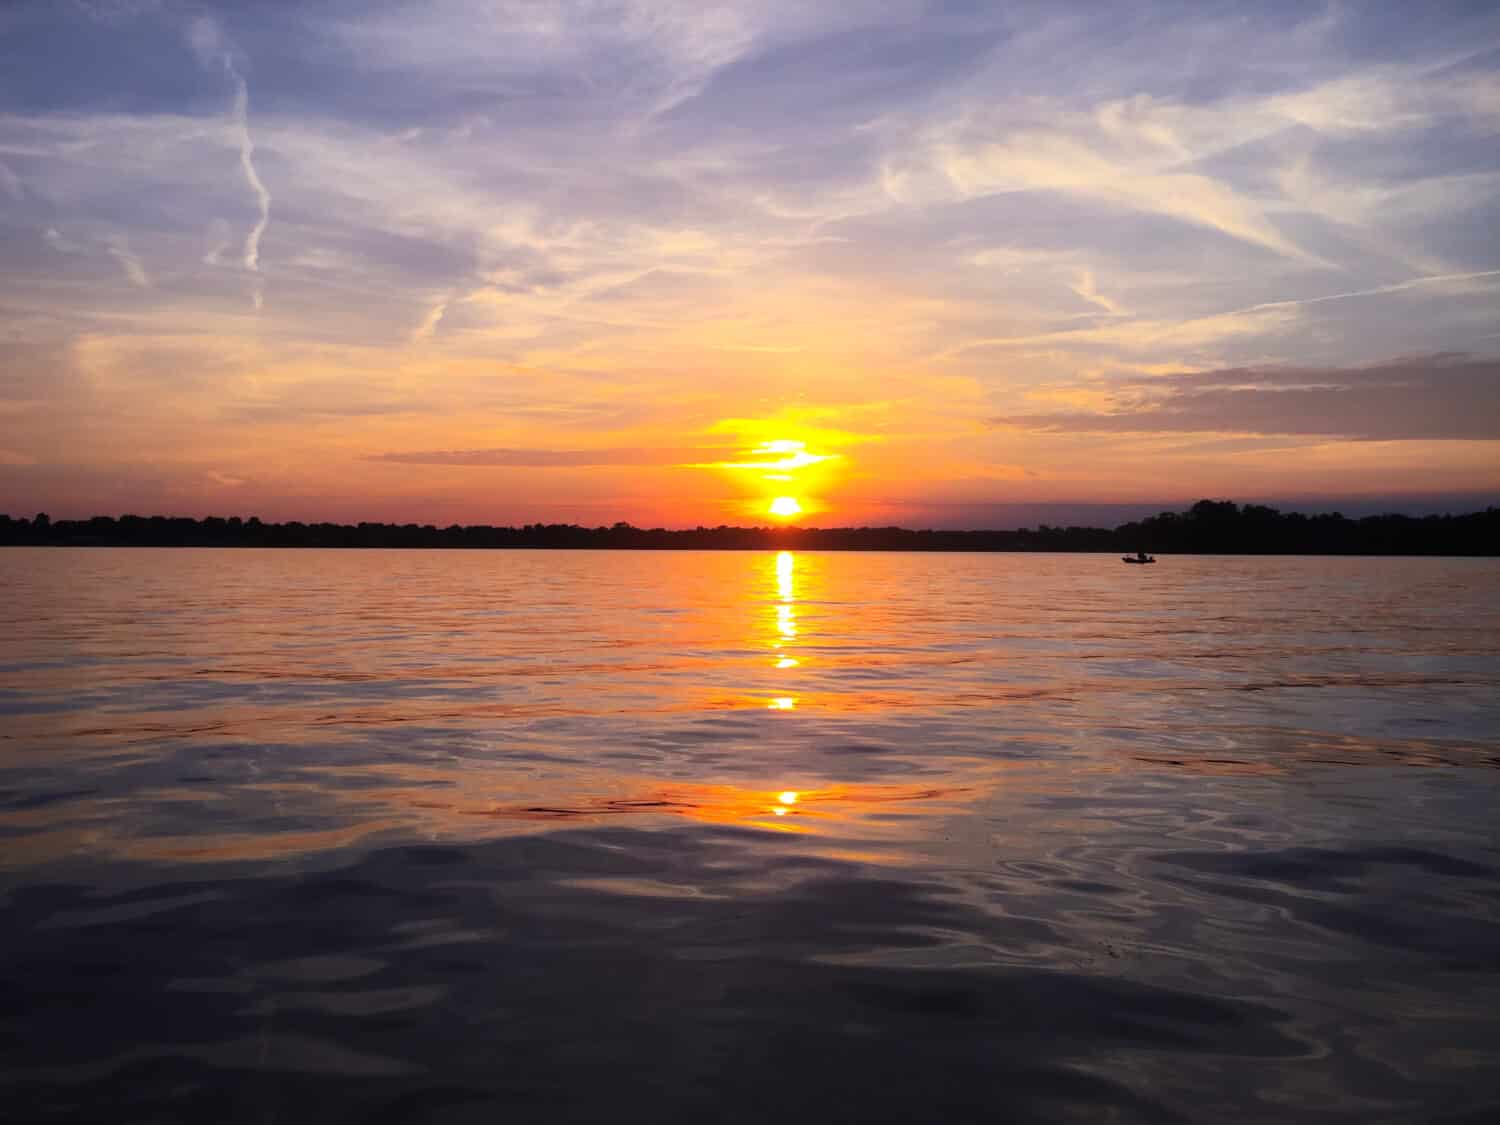 A sunset picture taken at Webster Lake in North Webster, Indiana